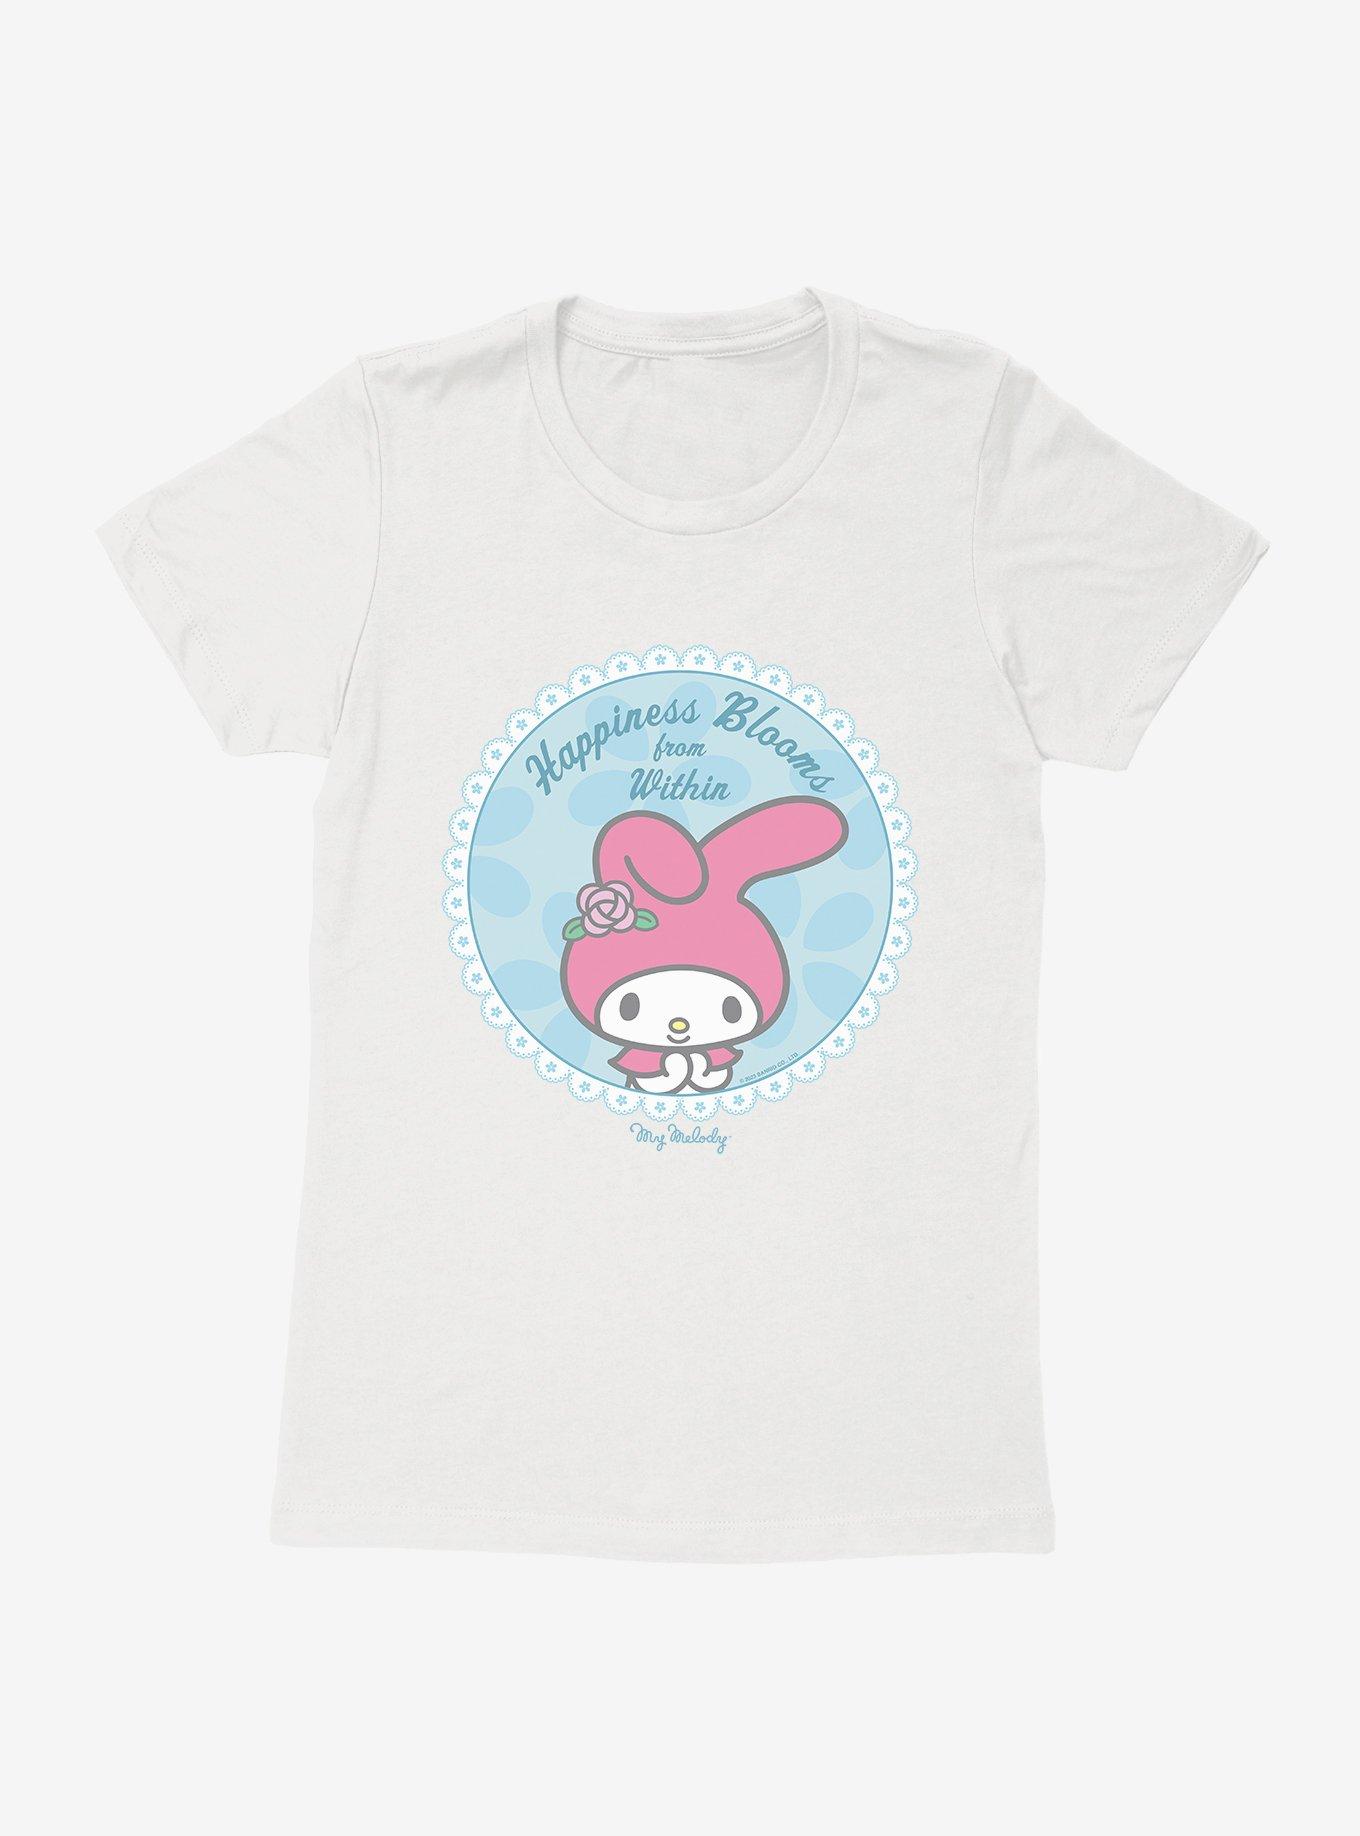 My Melody Happiness Blooms From Within Womens T-Shirt, WHITE, hi-res